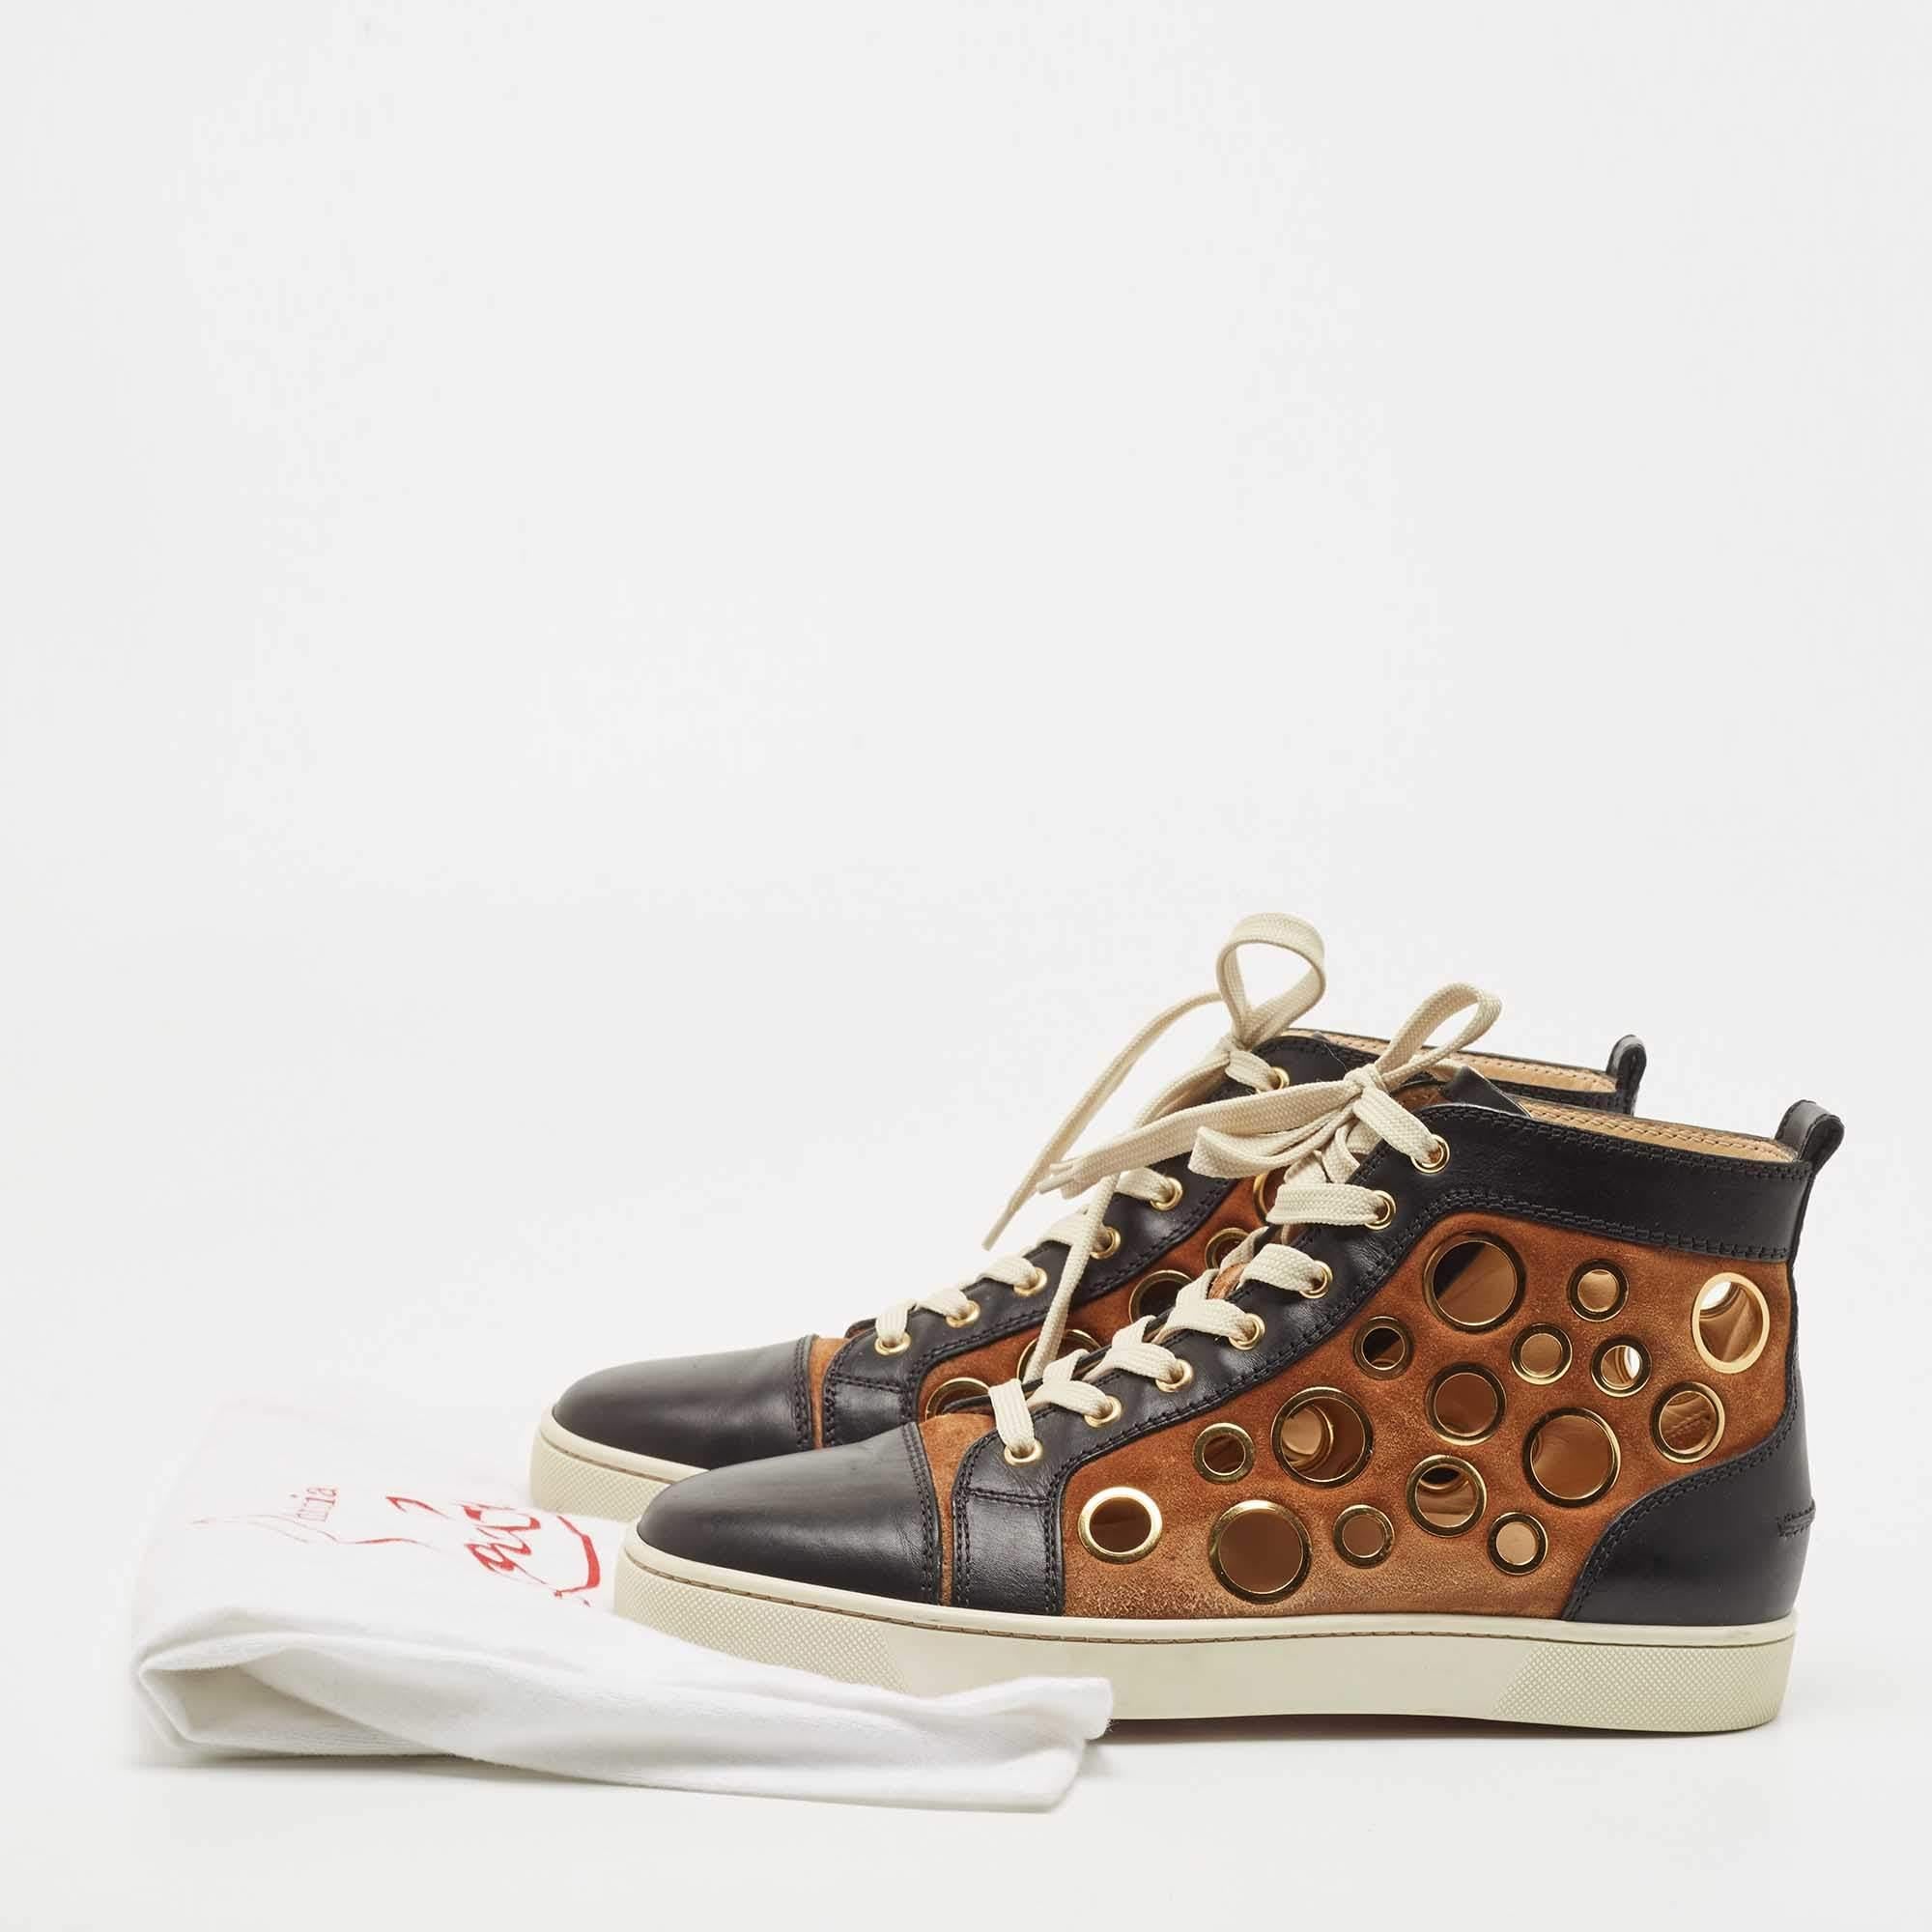 Christian Louboutin Leather and Suede Laser Cut High Top Sneakers Size 42.5 5